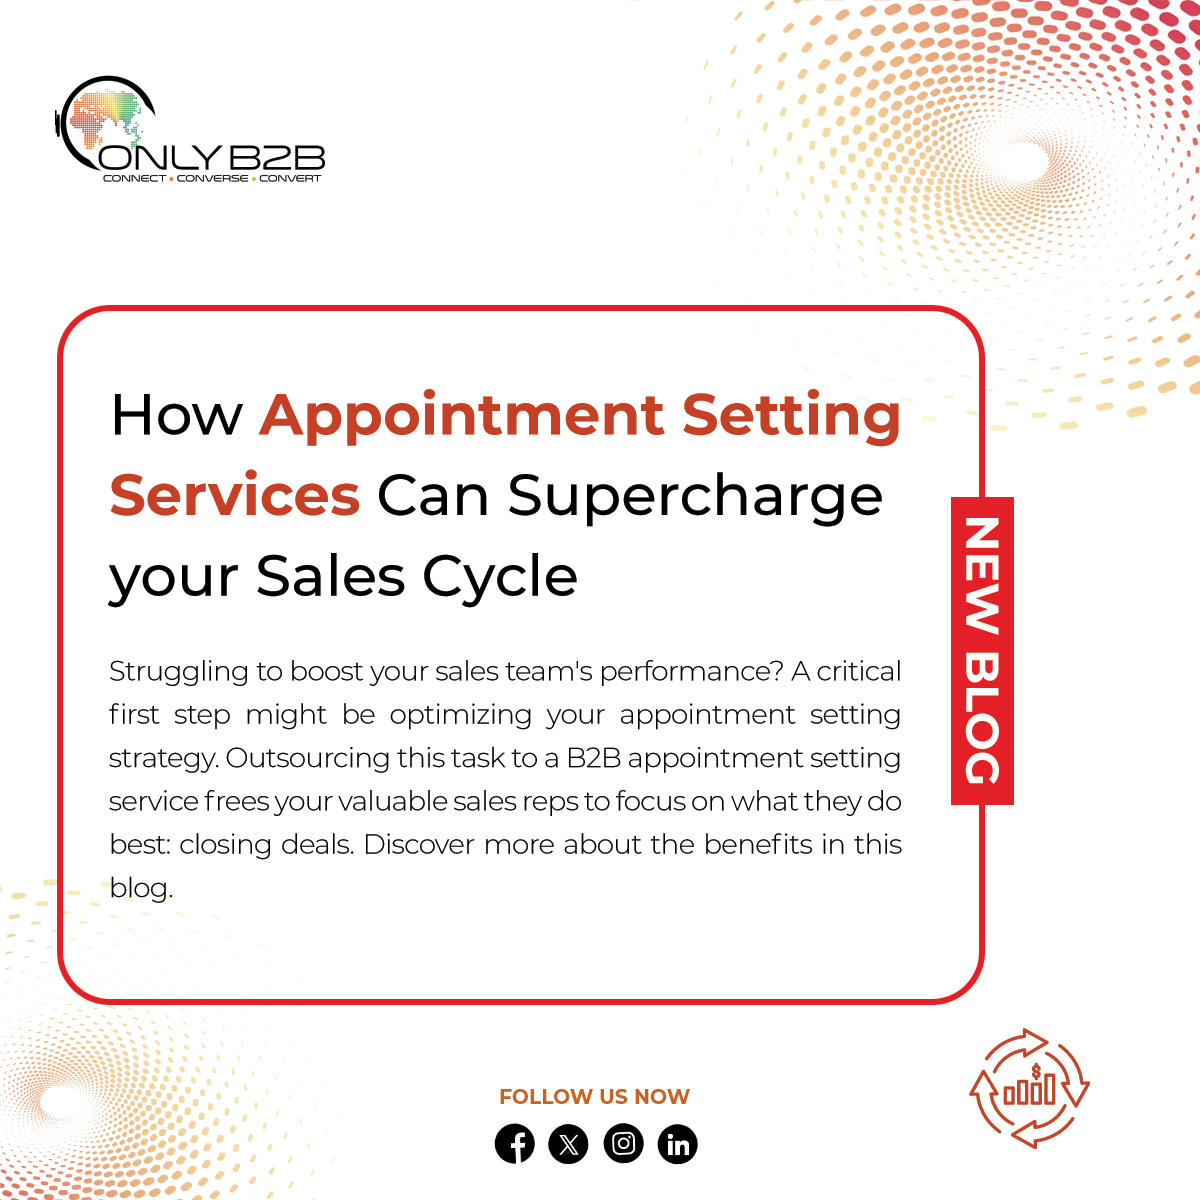 Drowning in appointment scheduling? Discover how outsourcing can streamline operations & free up your time! ➡ bit.ly/49BhbyB #AppointmentScheduling #GrowYourBusiness #AppointmentSetting #OnlyB2B